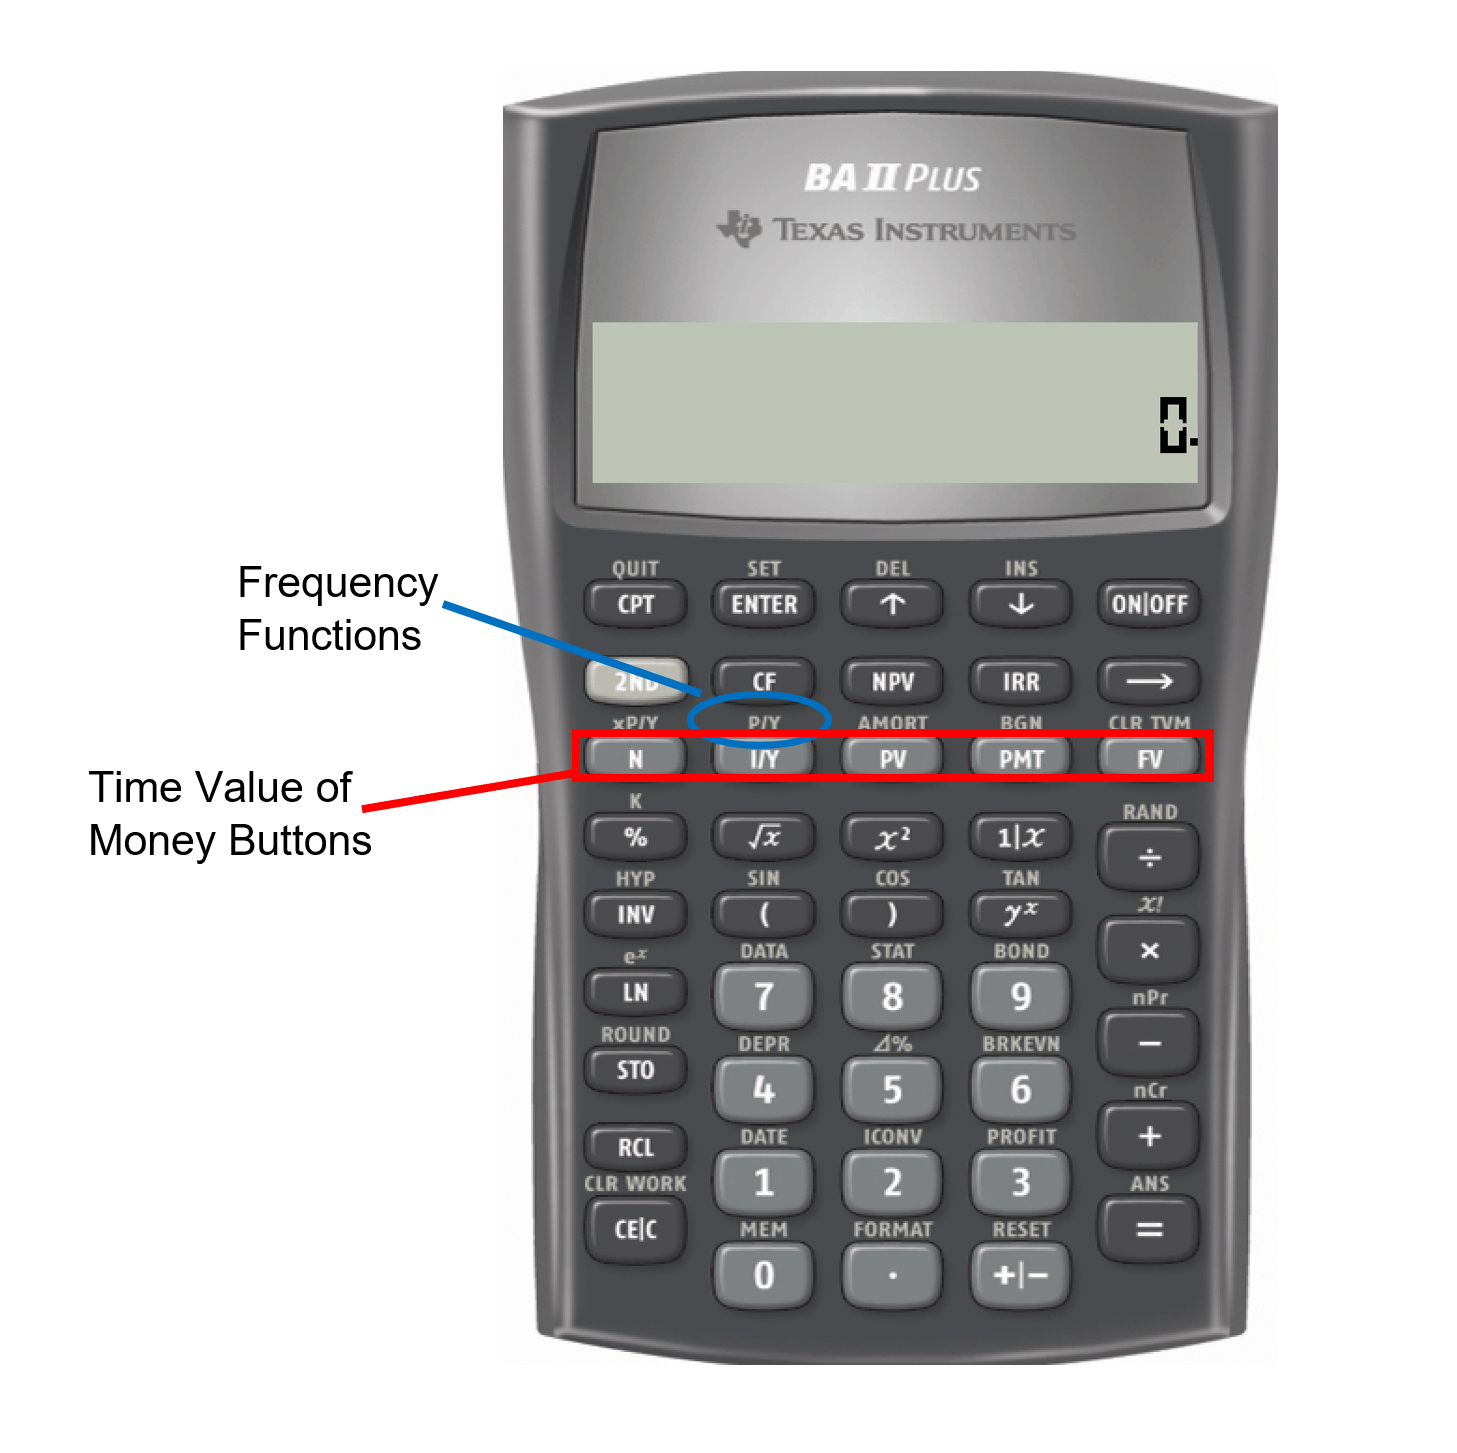 Picture of the BAII Plus calculator showing the Frequency Functions, and the Time Value of Money Buttons.